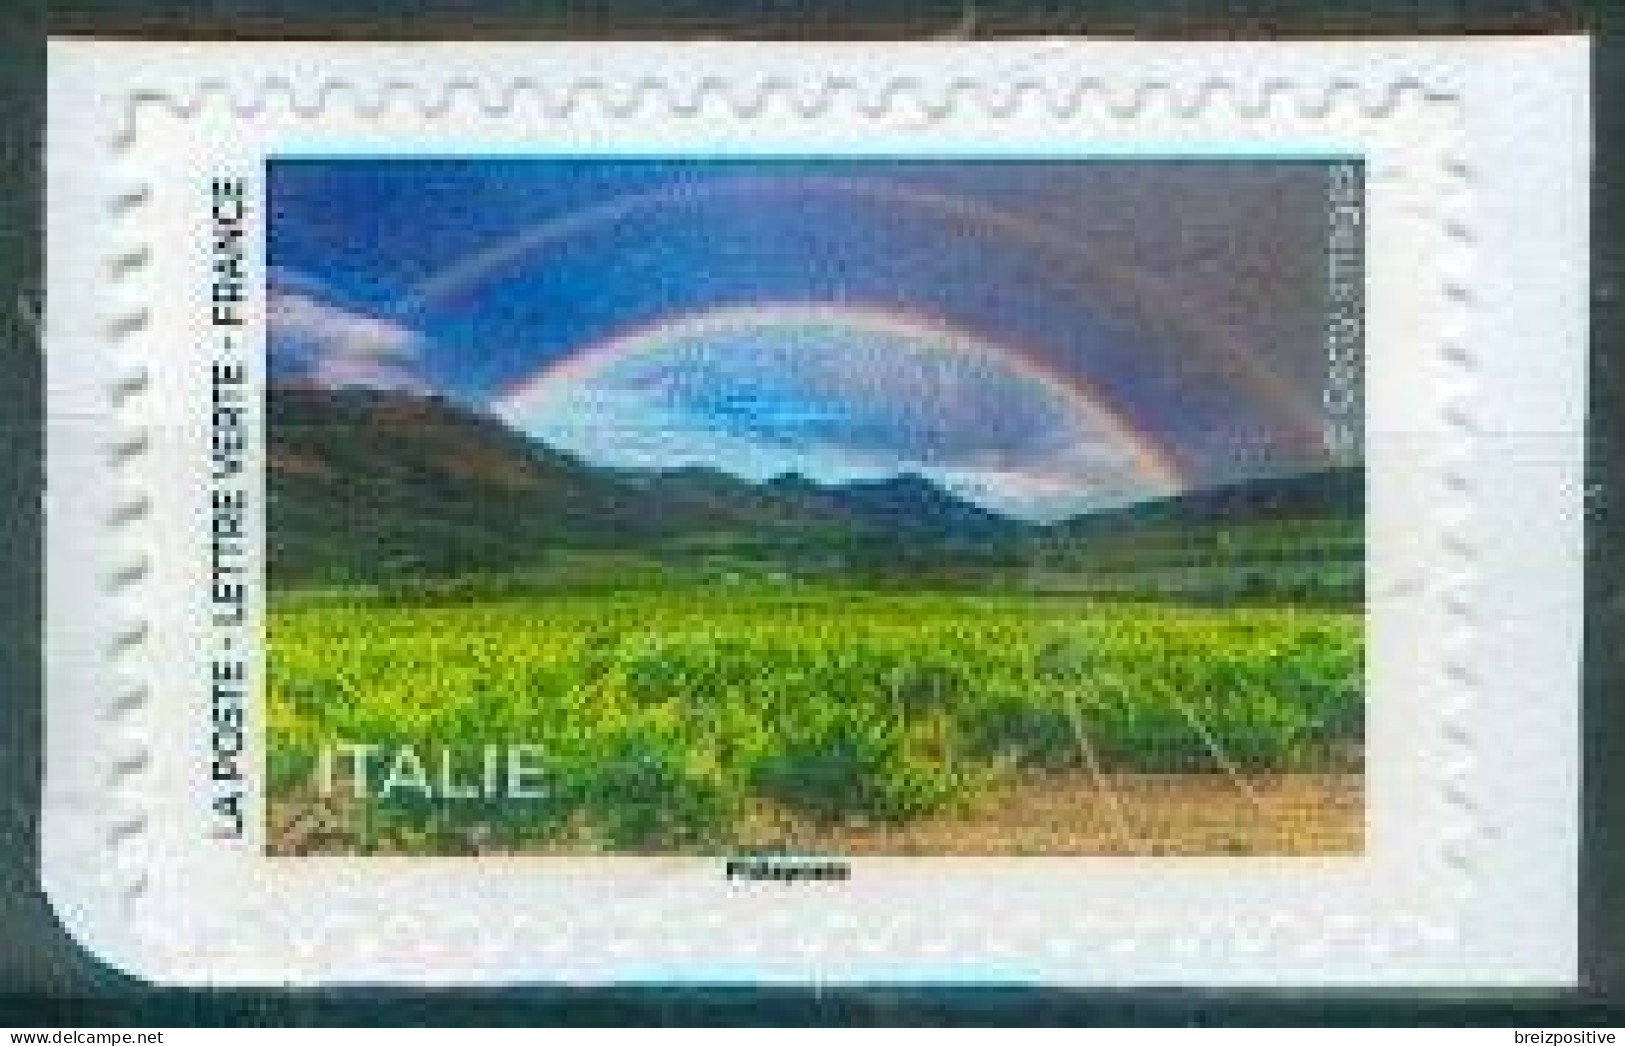 France 2022 - Vignoble En Italie / Vineyard In Italy - MNH - Wines & Alcohols